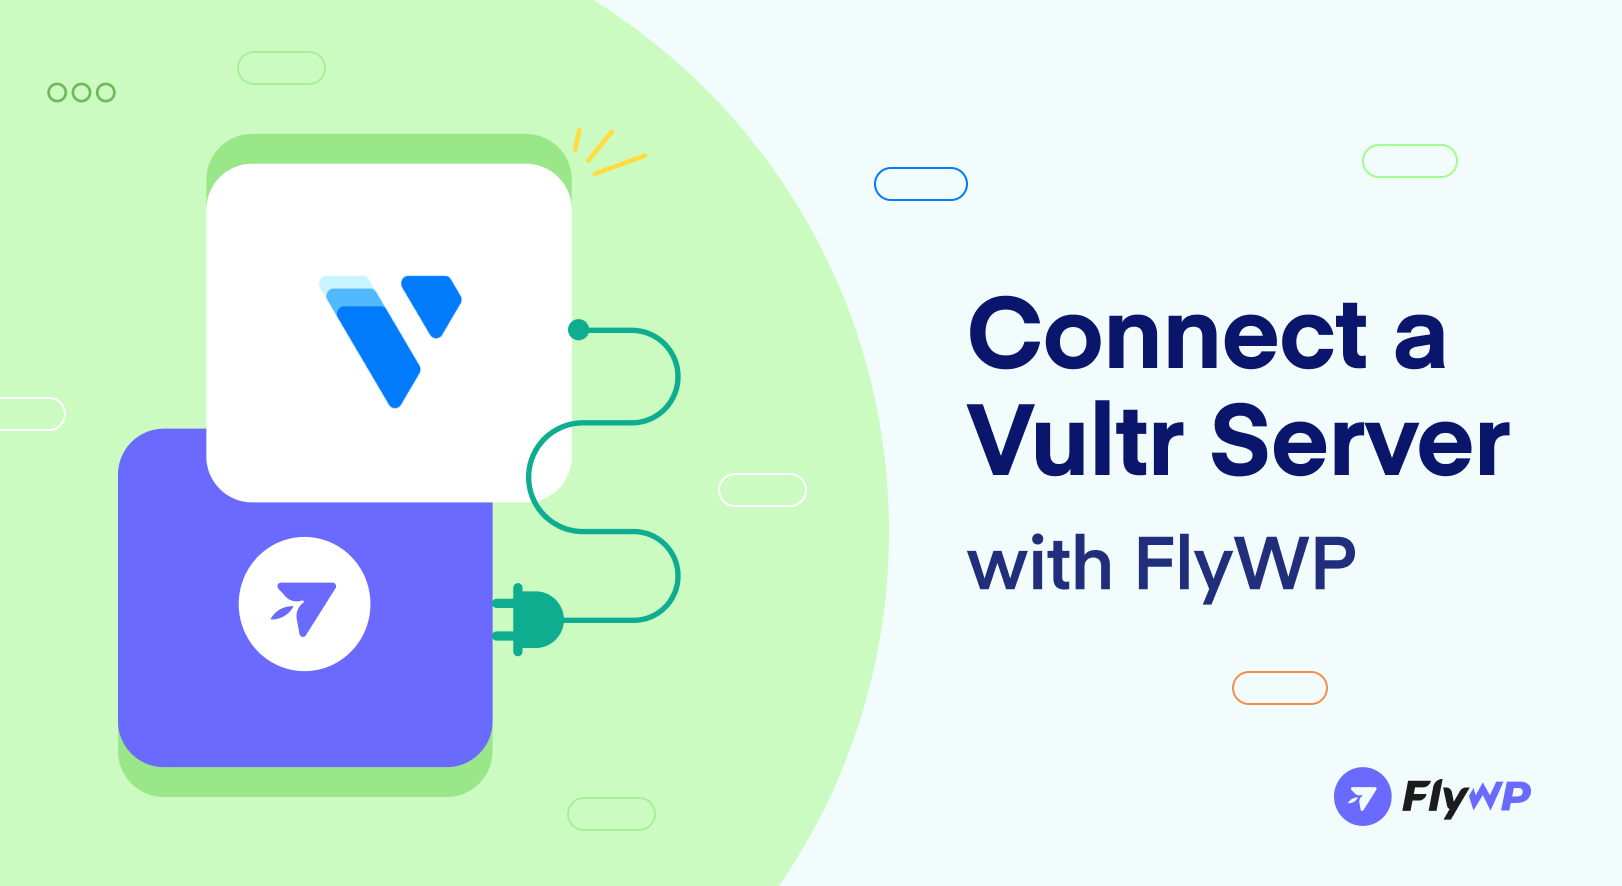 How To Connect A Vultr Server With Flywp